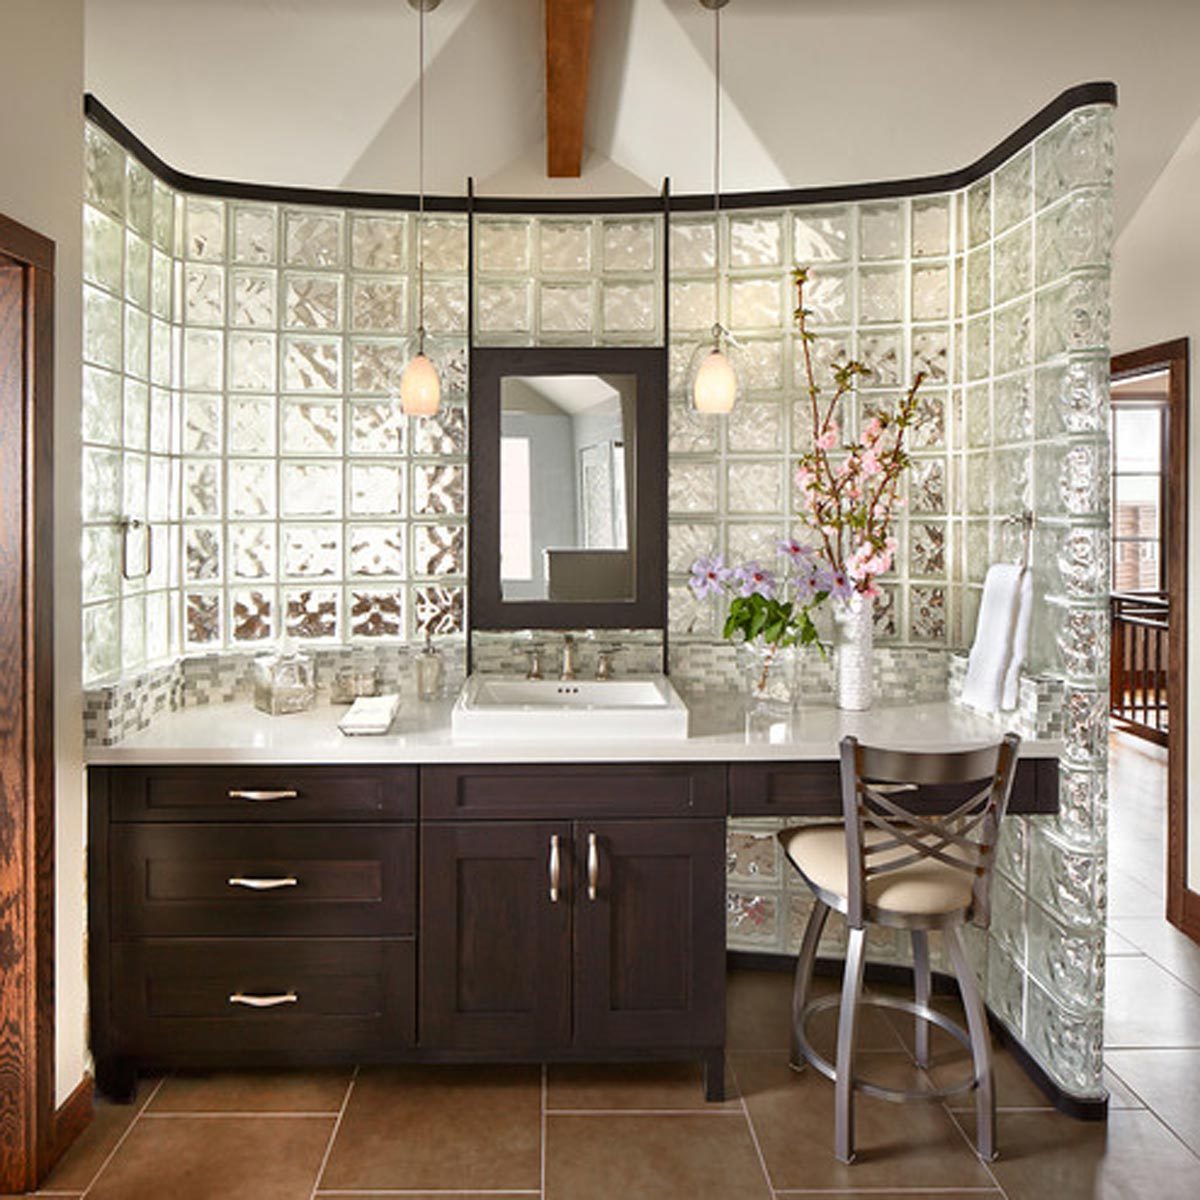 12 Bathroom Trends on the Way Out